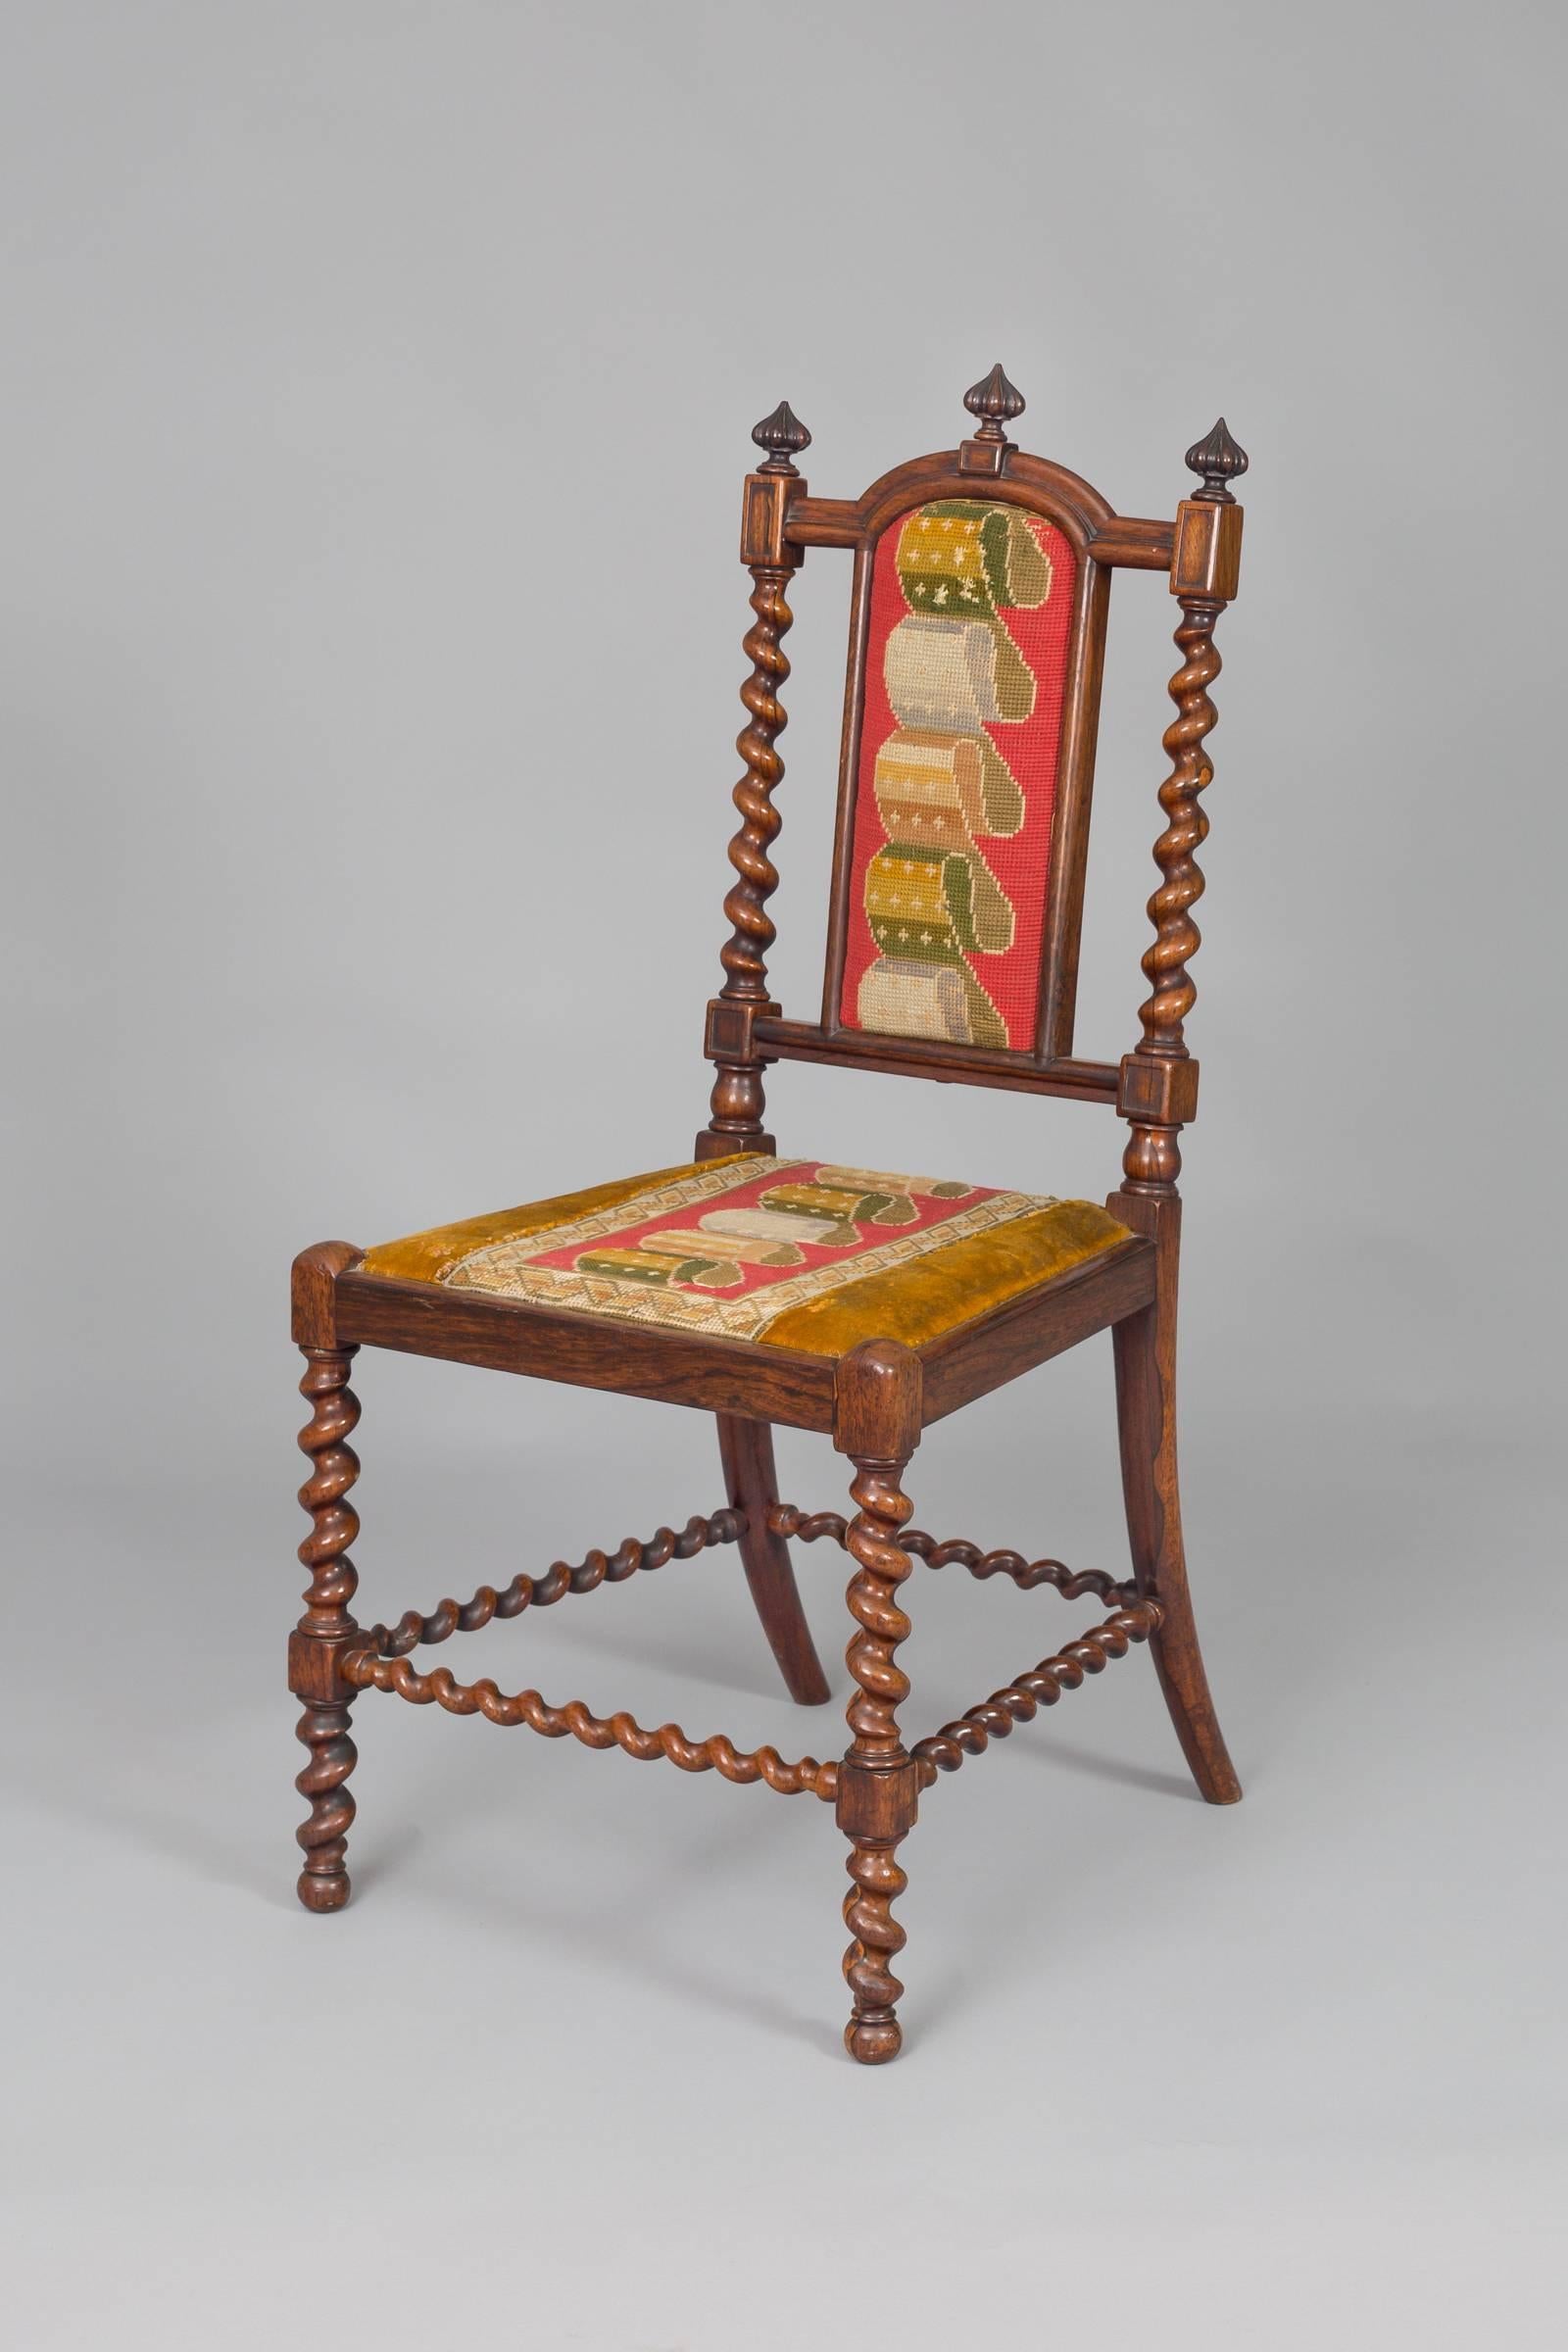 Early Victorian rosewood child’s side chair with barley twist uprights, legs and stretchers, three carved finials on the shaped top rail, colorful needlework back and seat done in a ribbon pattern, splay back legs.